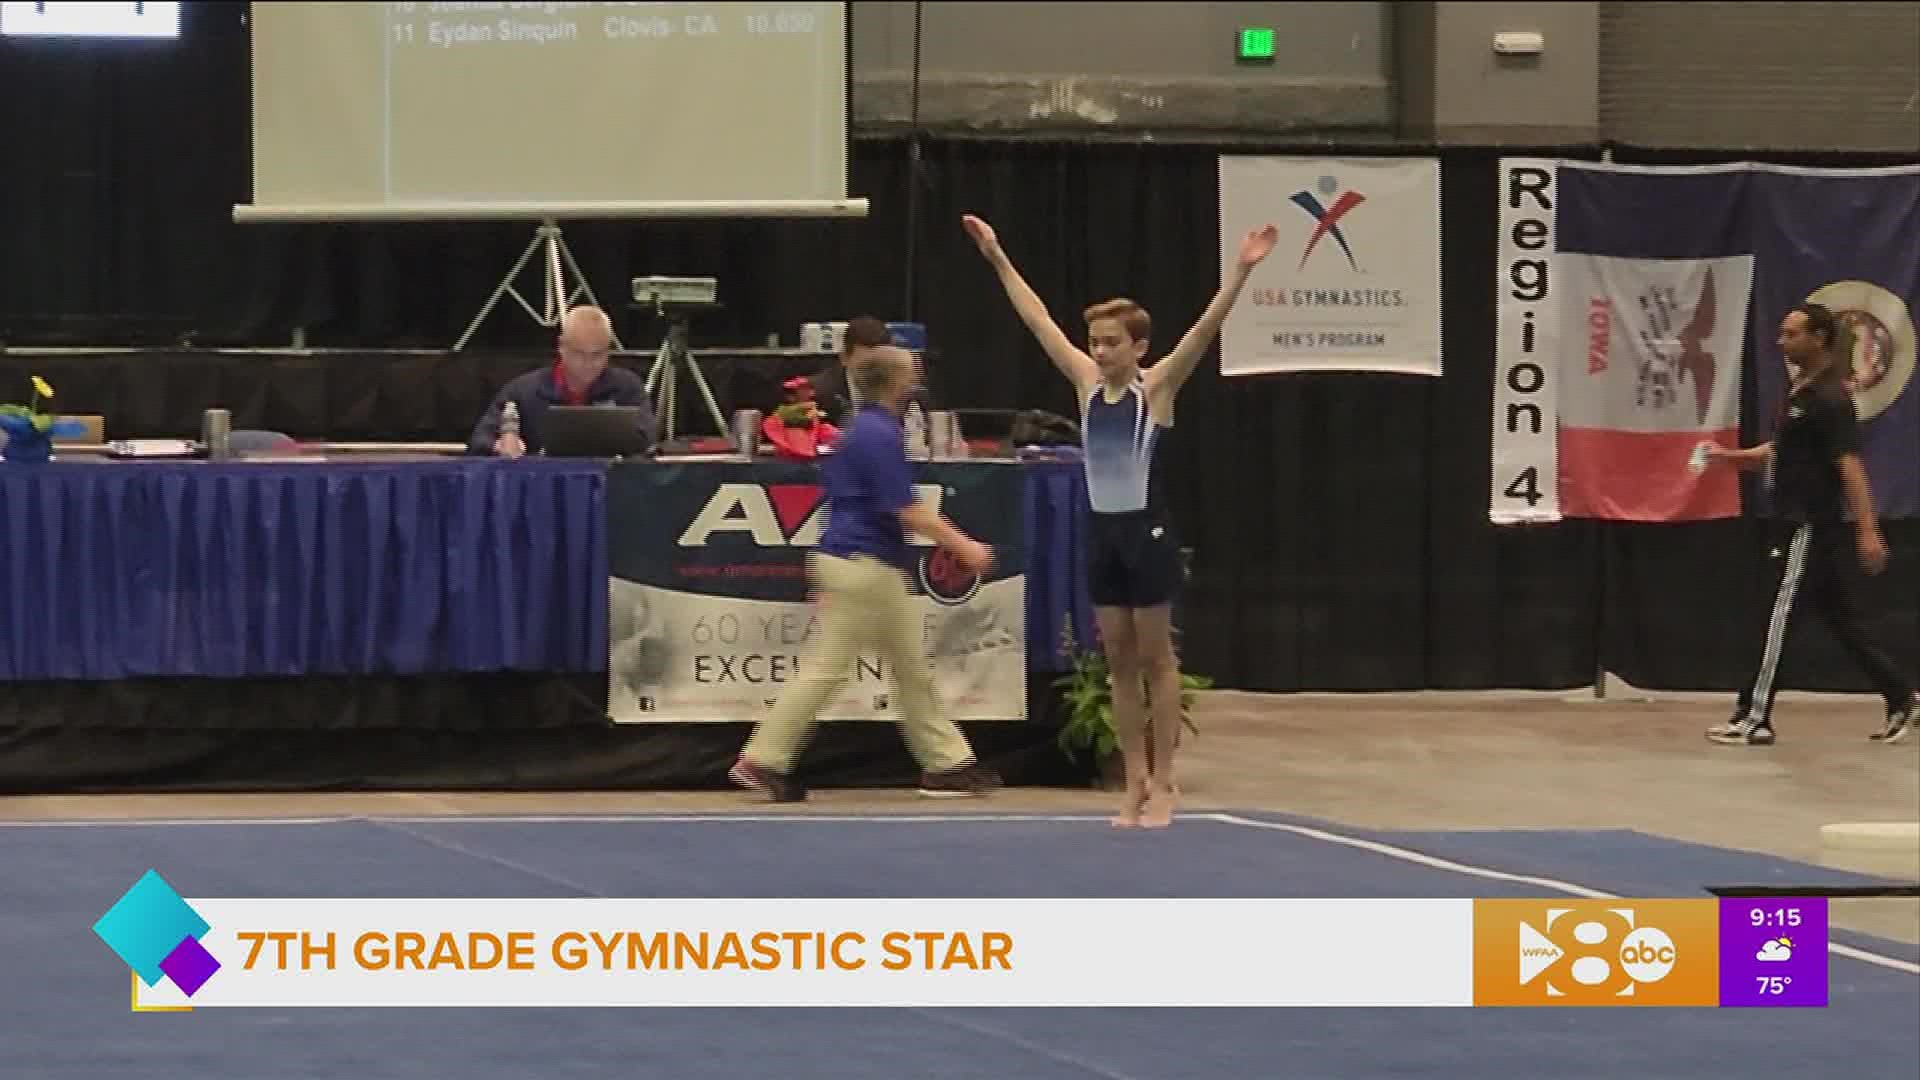 Colton Jimmerson tells us about his journey and triumphs as a gymnast and his goals for the future.